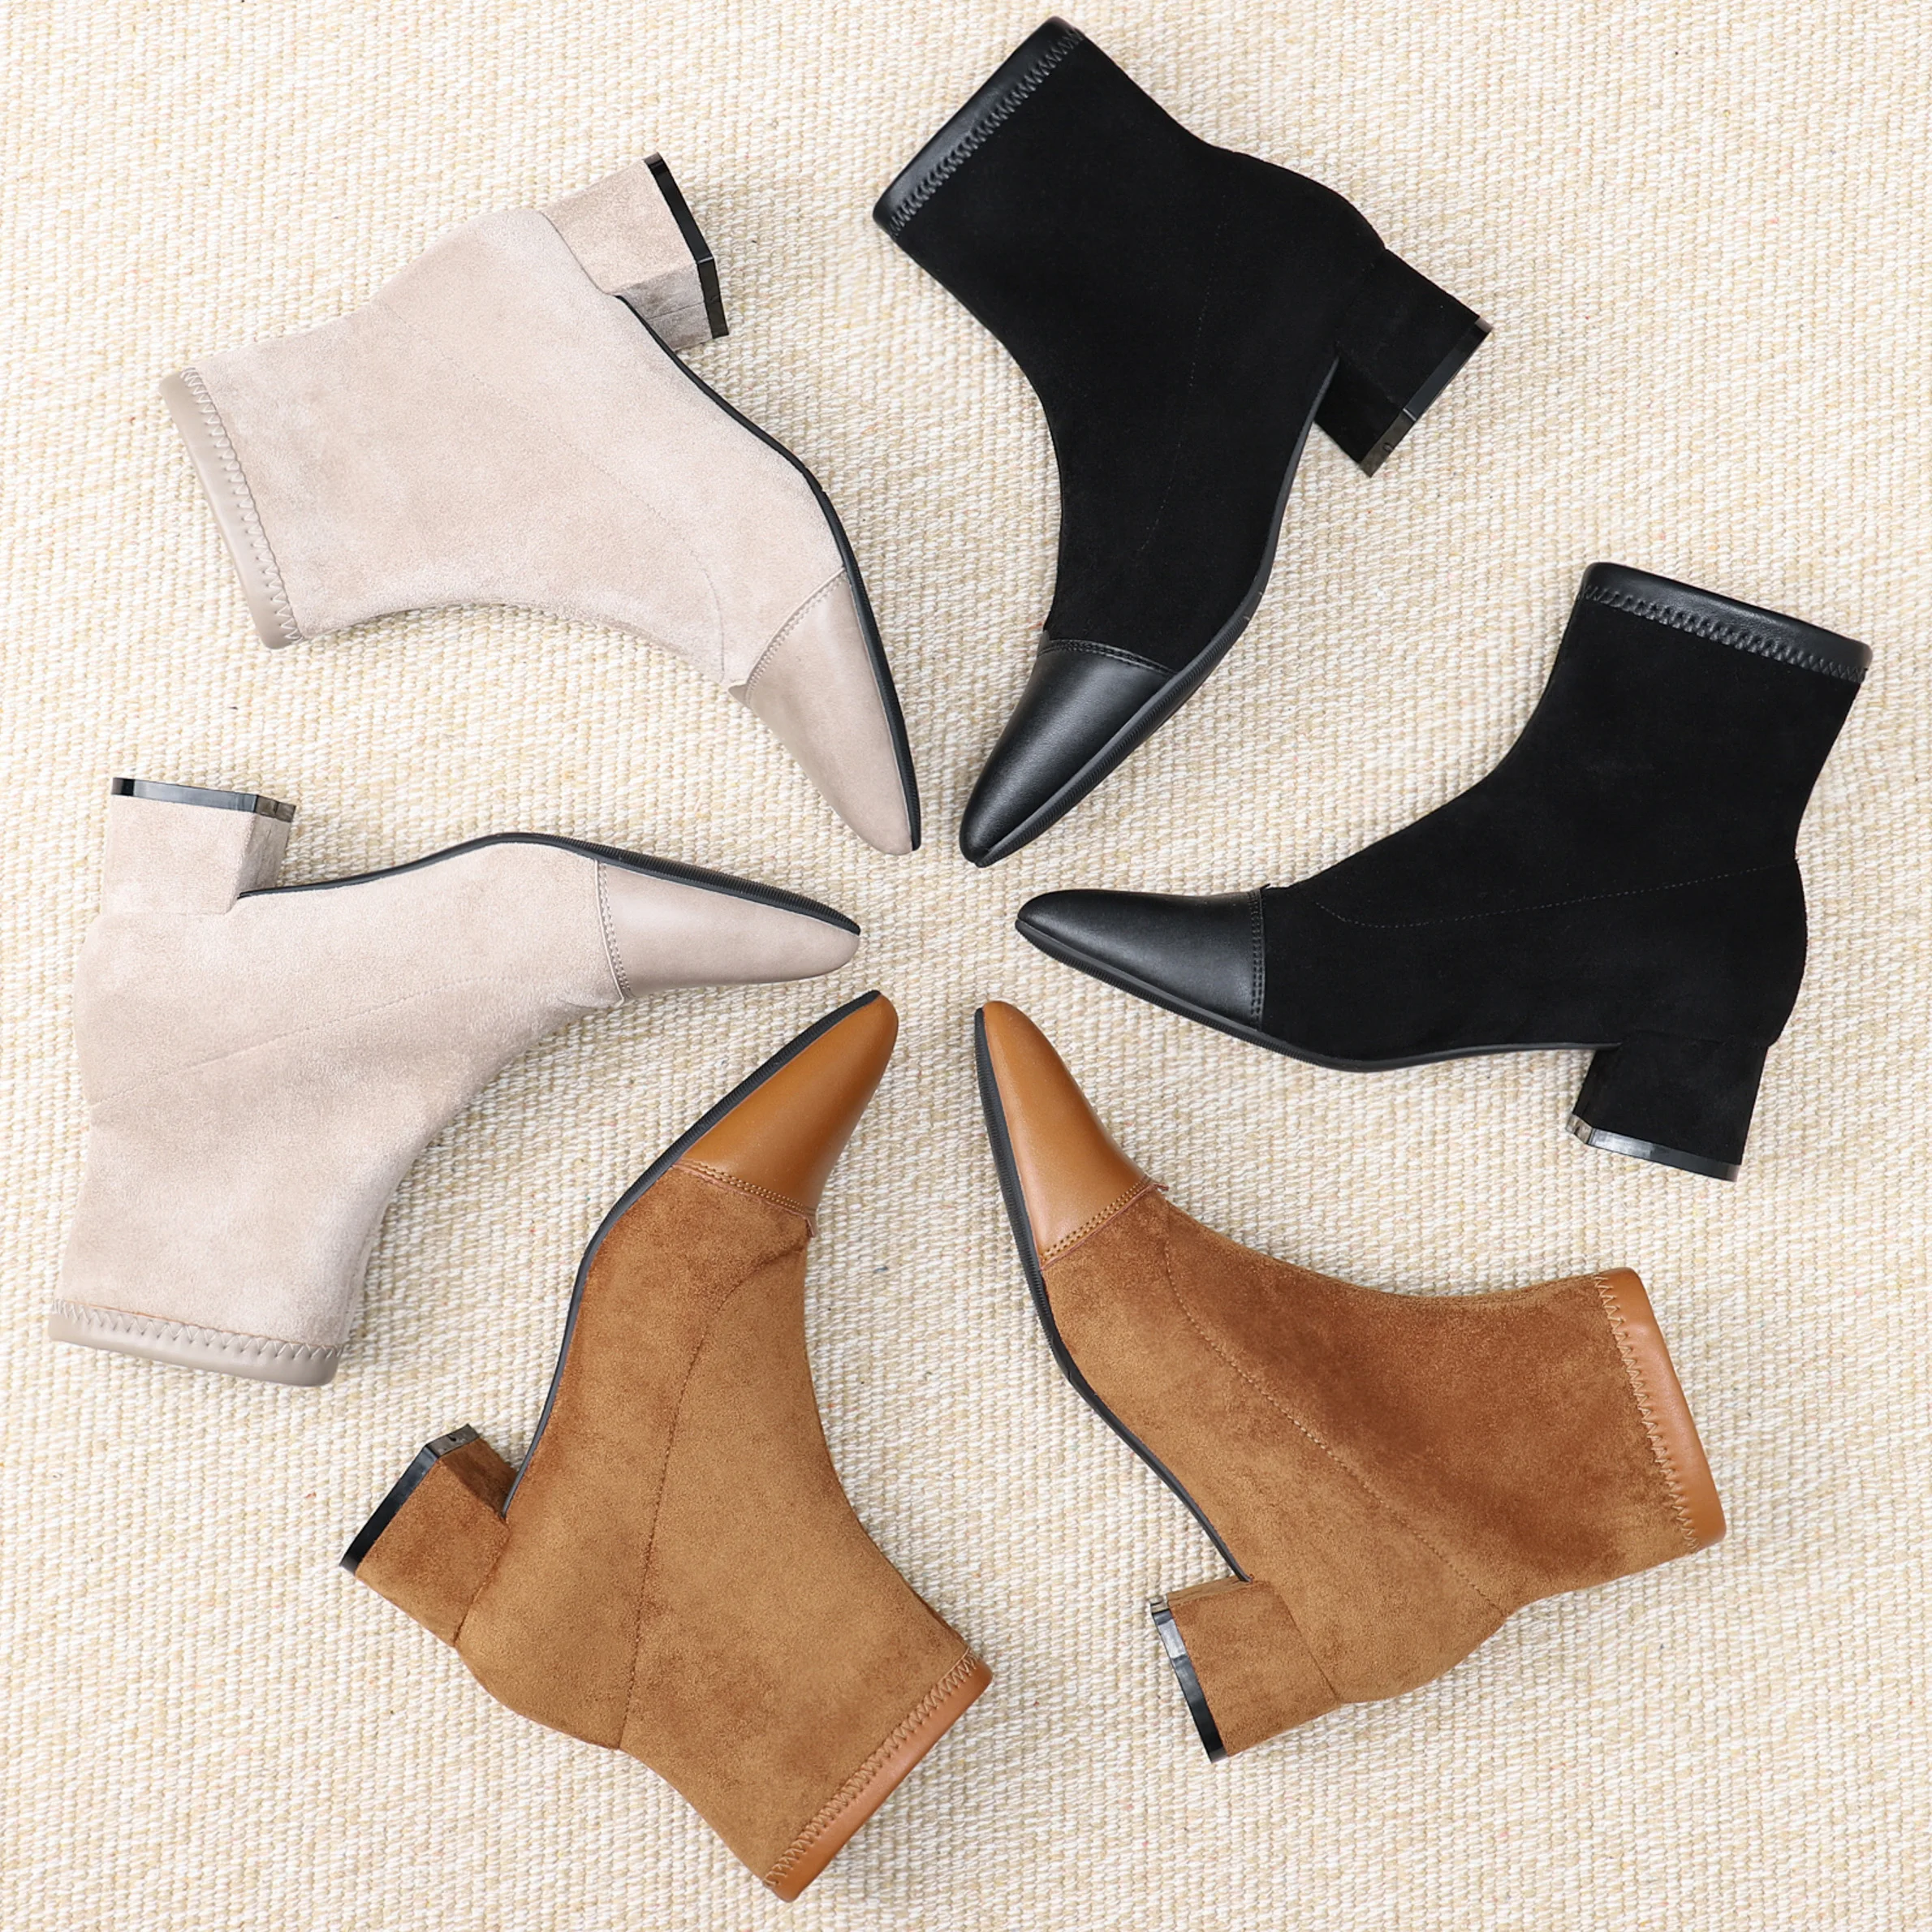 

2019 Winter Woman Boots Pointed Toe Square Med High Heels 4.5cm Solid Flock Slip On Women's Ankle Rubber Sole Snow Martin Boots